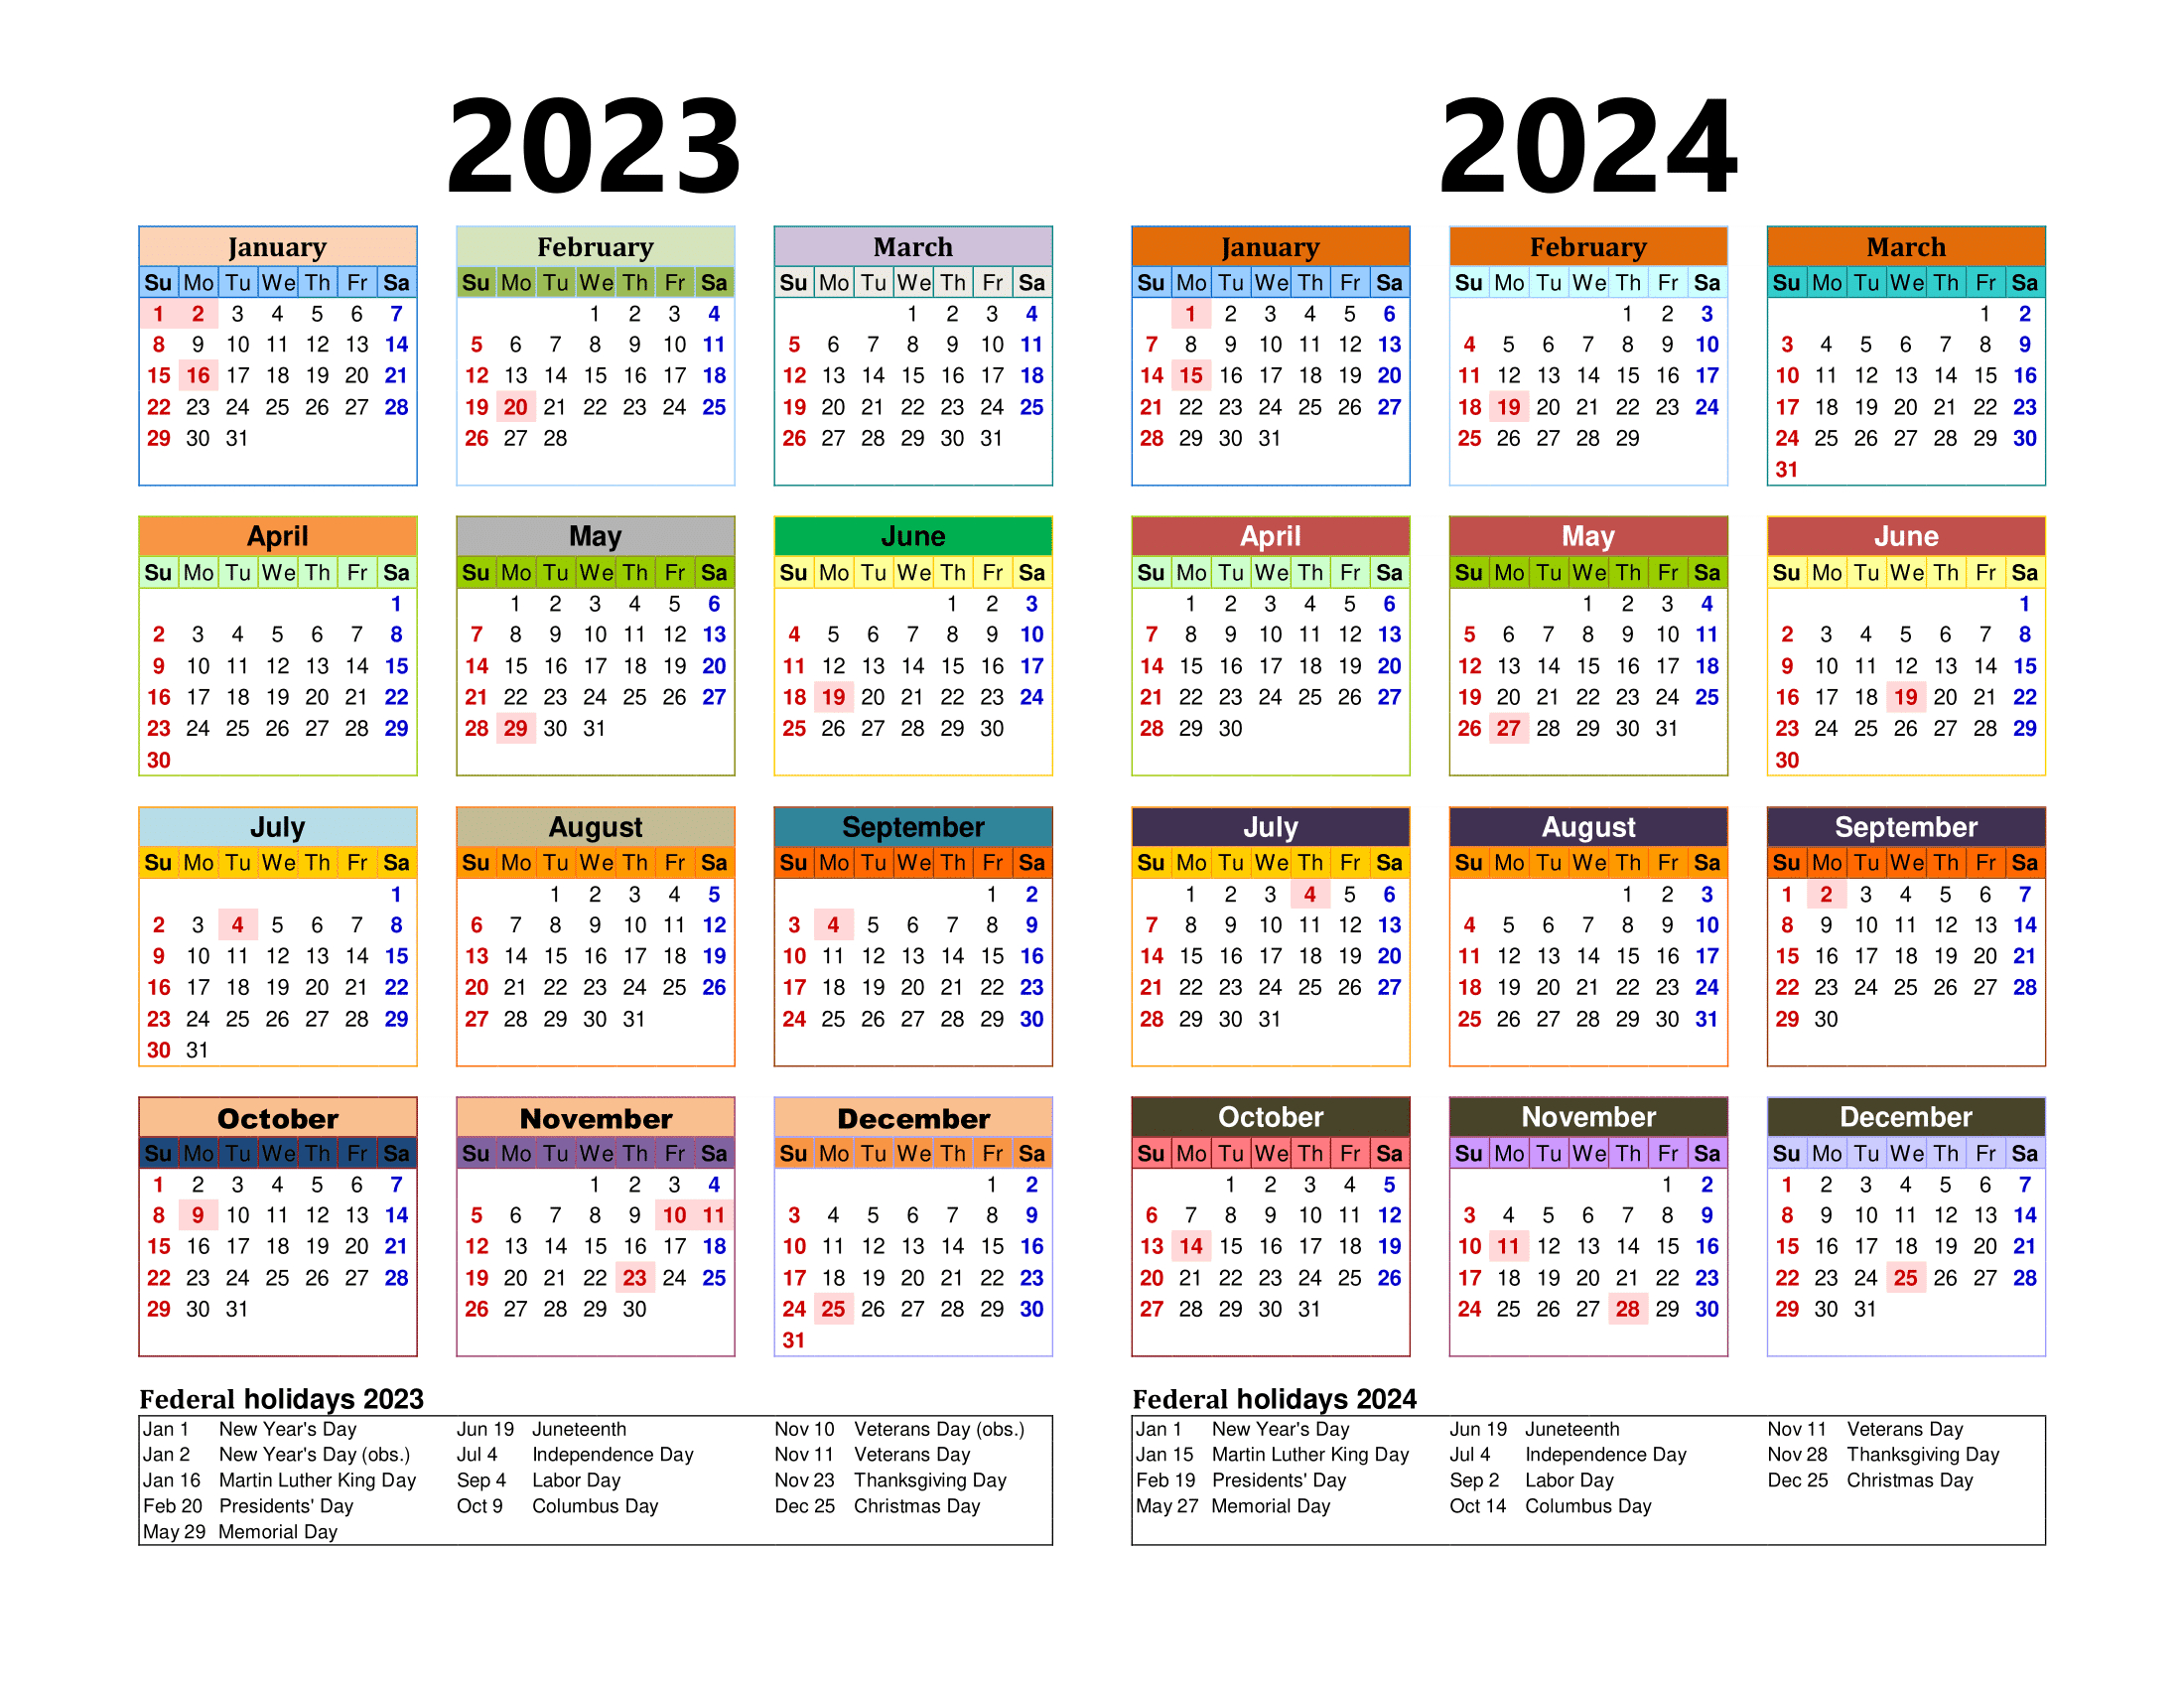 Free Printable Two Year Calendar Templates For 2023 And 2024 In Pdf | 2023 Calendar 2024 Printable Pdf Free